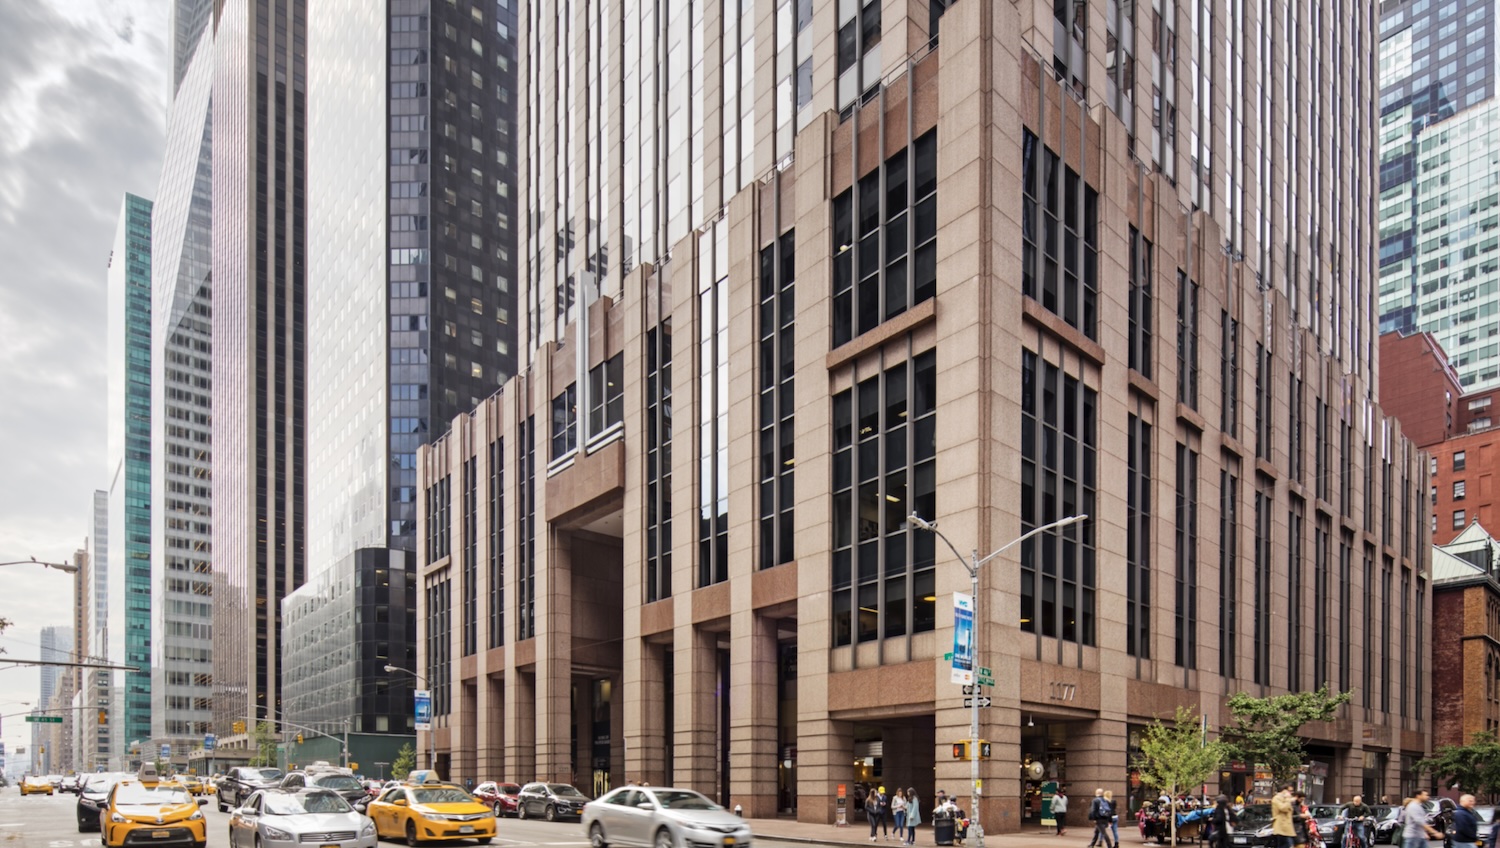 Photograph of 1177 Avenue Of The Americas, via Silverstein Properties